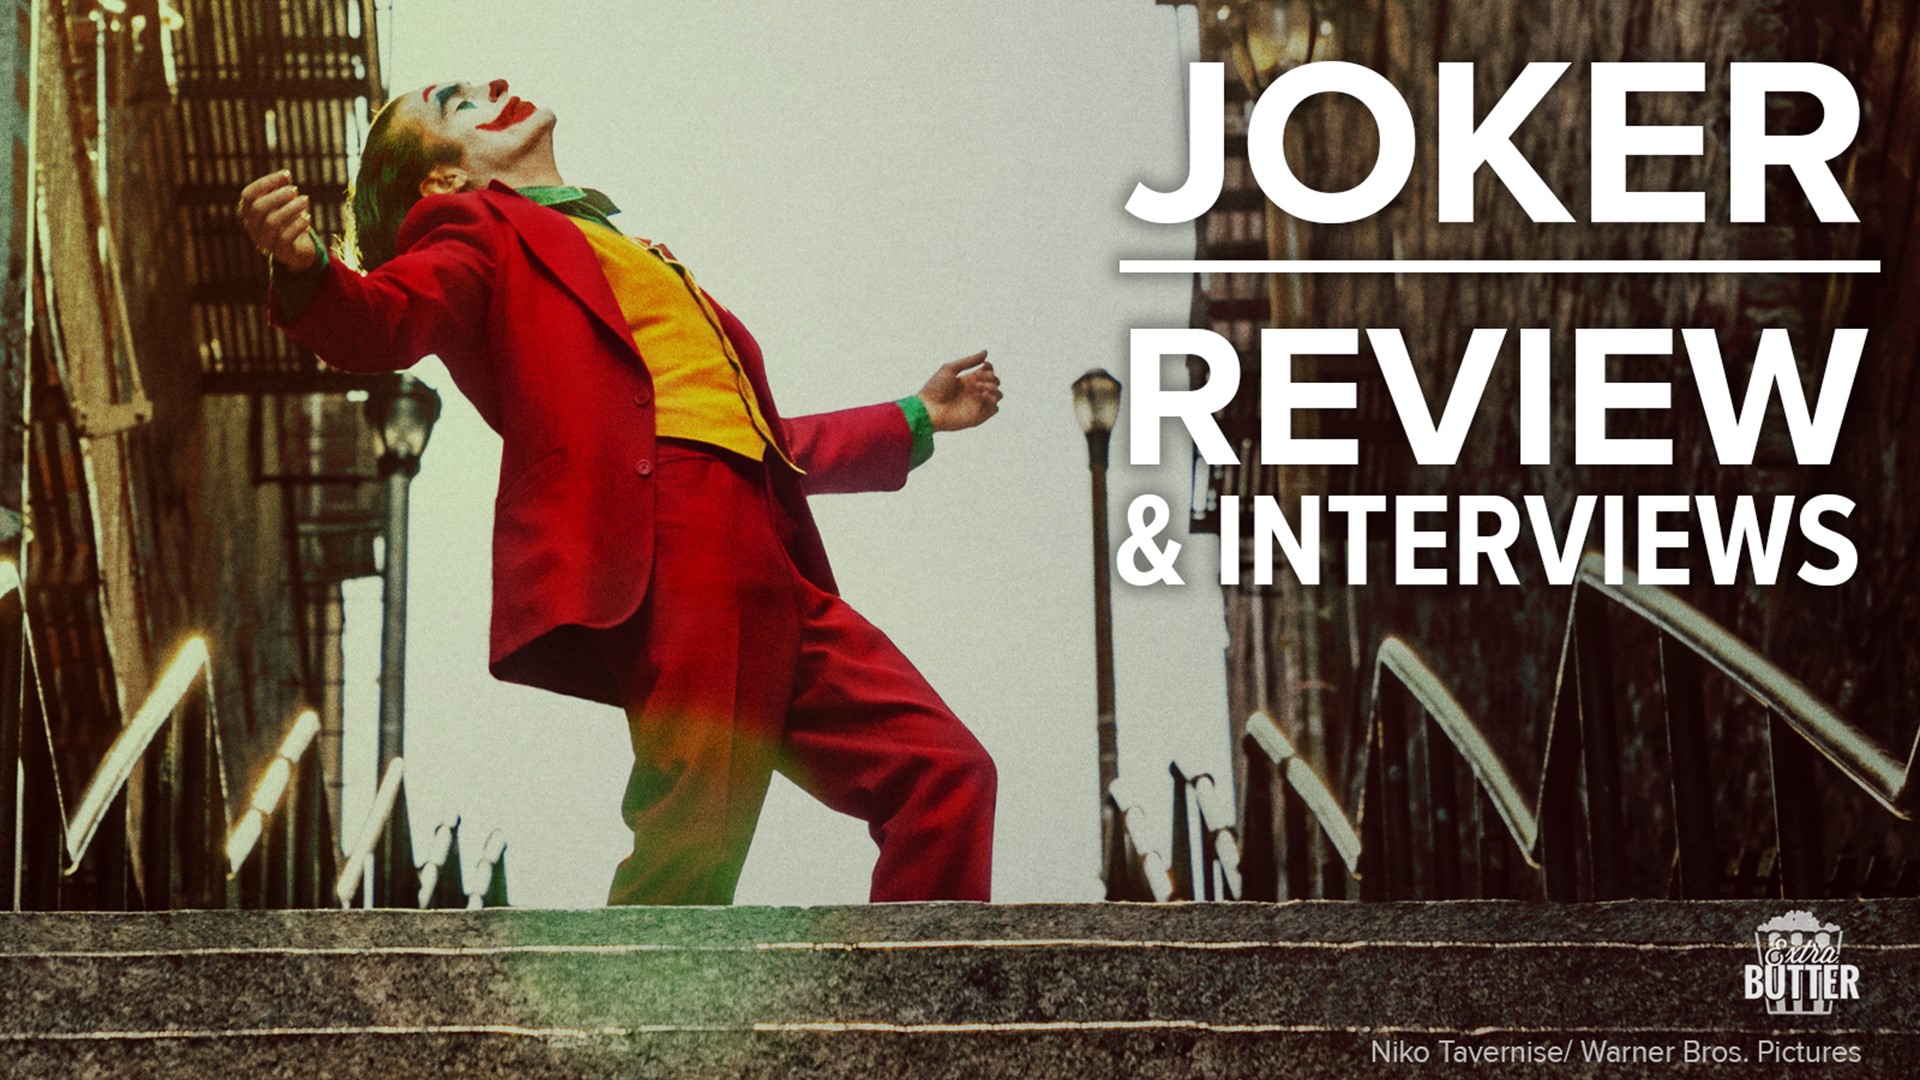 Extra Butter reviews the movie 'Joker' starring Joaquin Phoenix. Joaquin talks about the role, and Todd Phillips and Zazie Beetz talk about making the film.